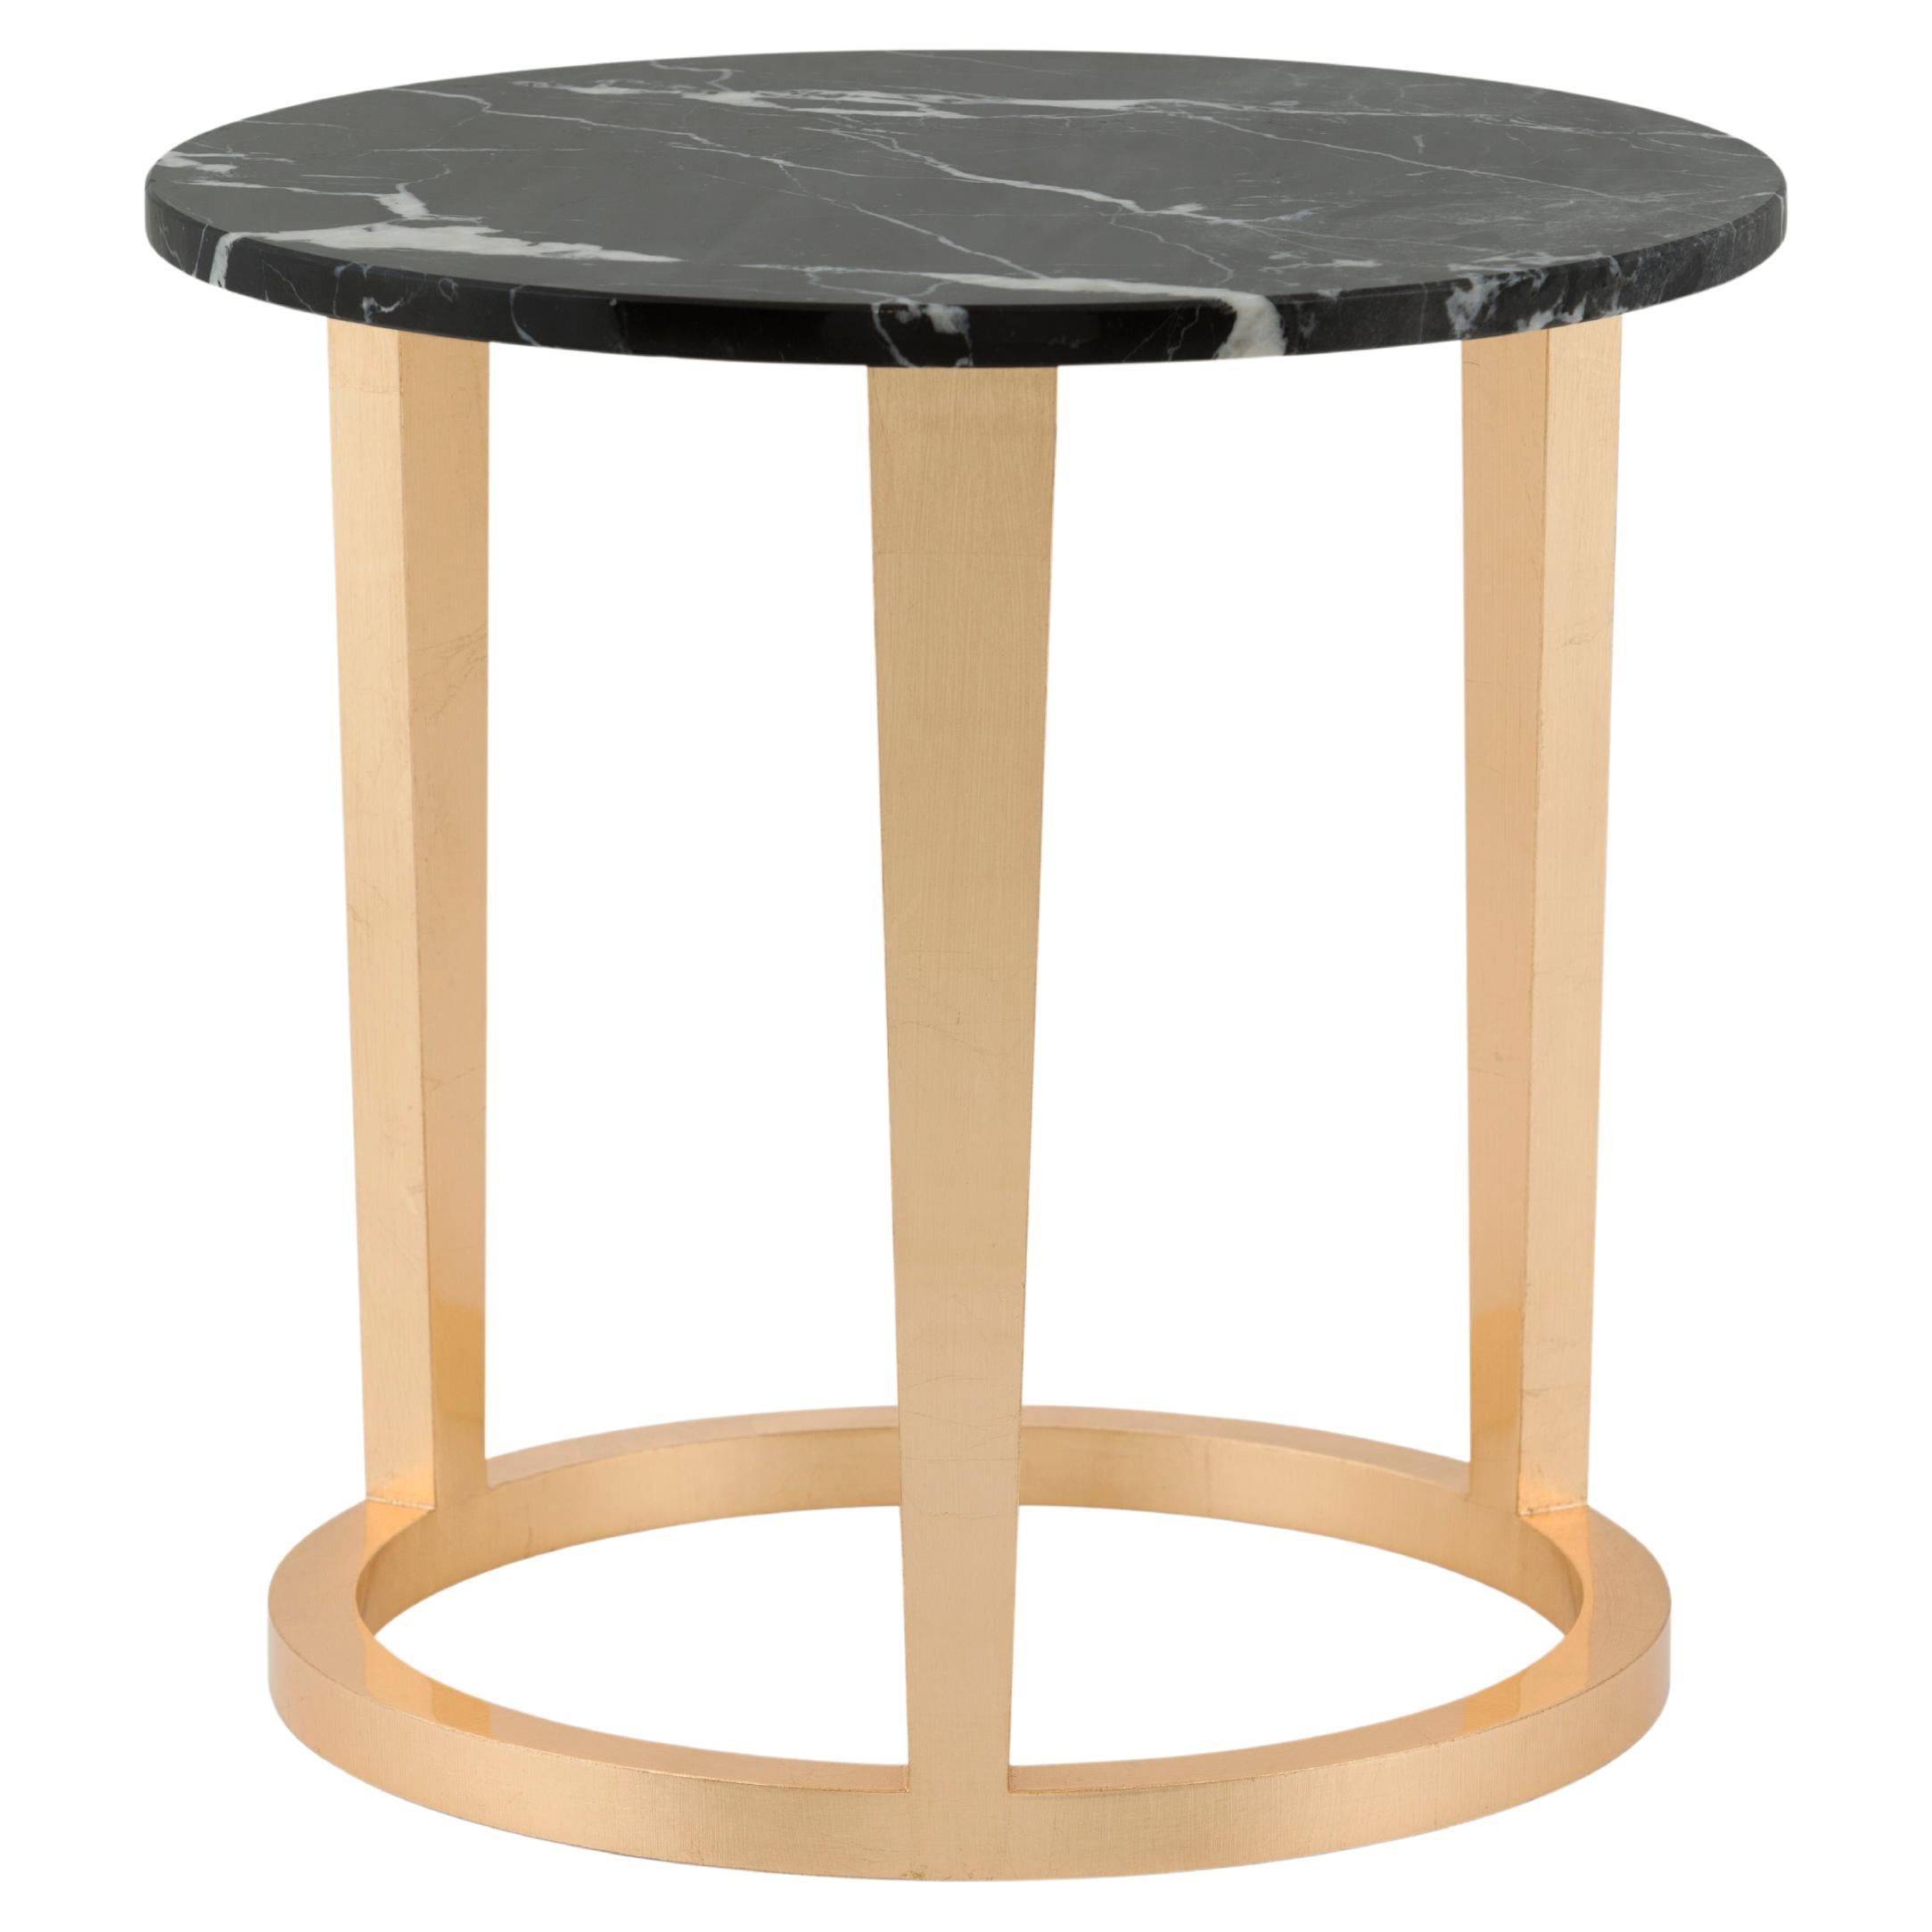 Art Deco Rubi Side Table with Nero Marquina Marble Handcrafted by Greenapple